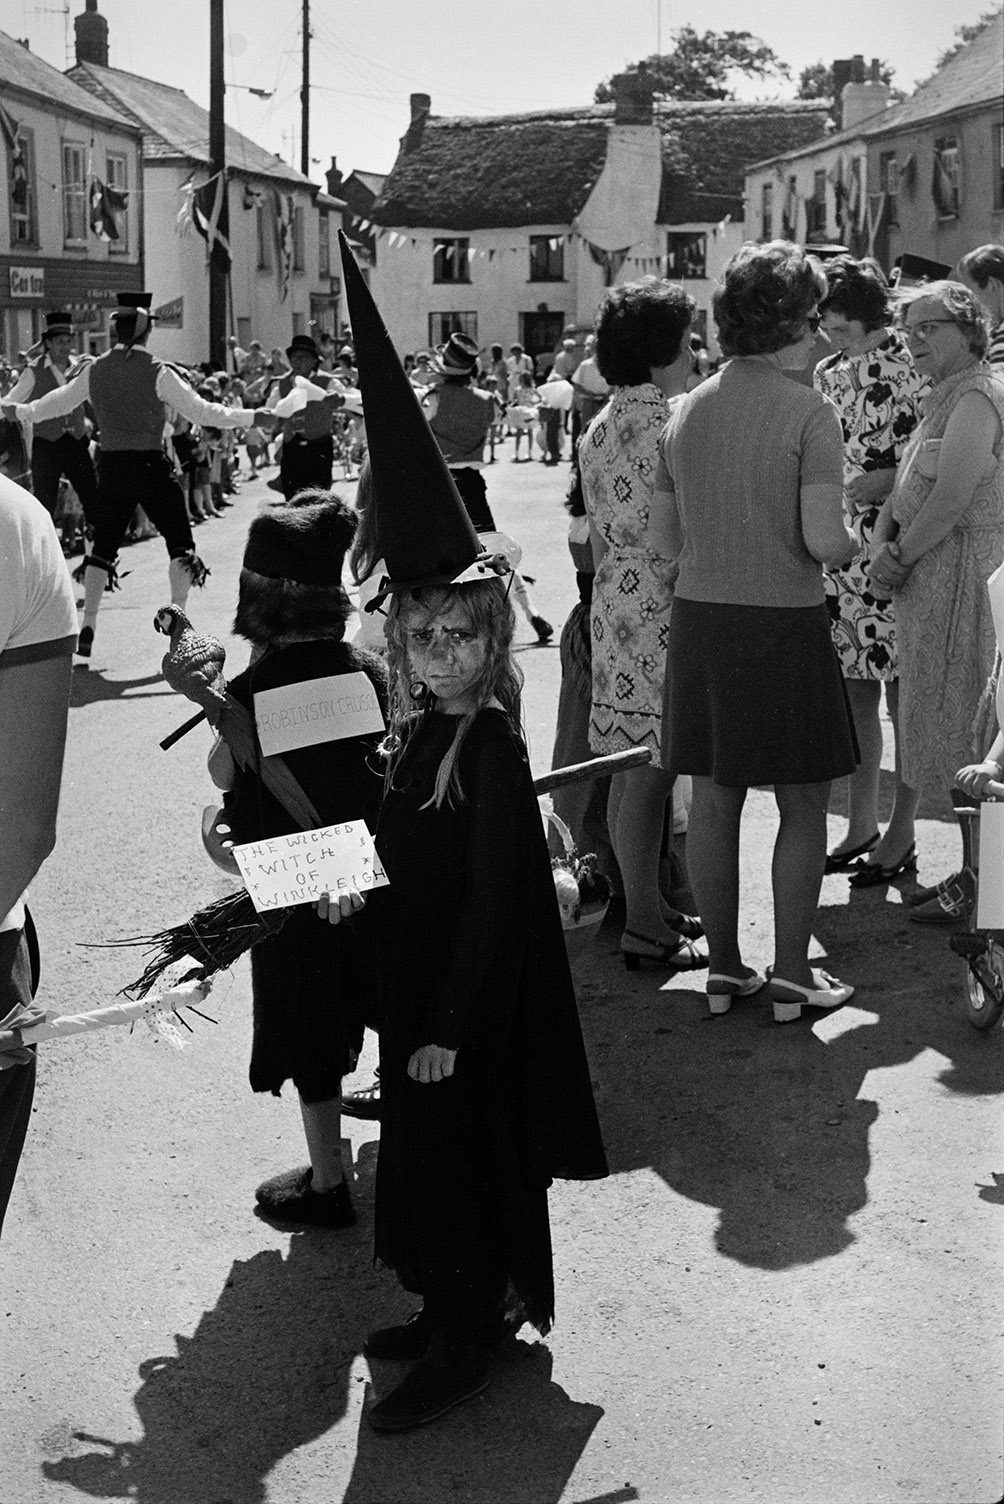 A girl in fancy dress costume titled 'The Wicked Witch of Winkleigh' at Winkleigh Fair with other spectators. Another child behind her is dressed as Robinson Crusoe. The square is decorated with bunting.